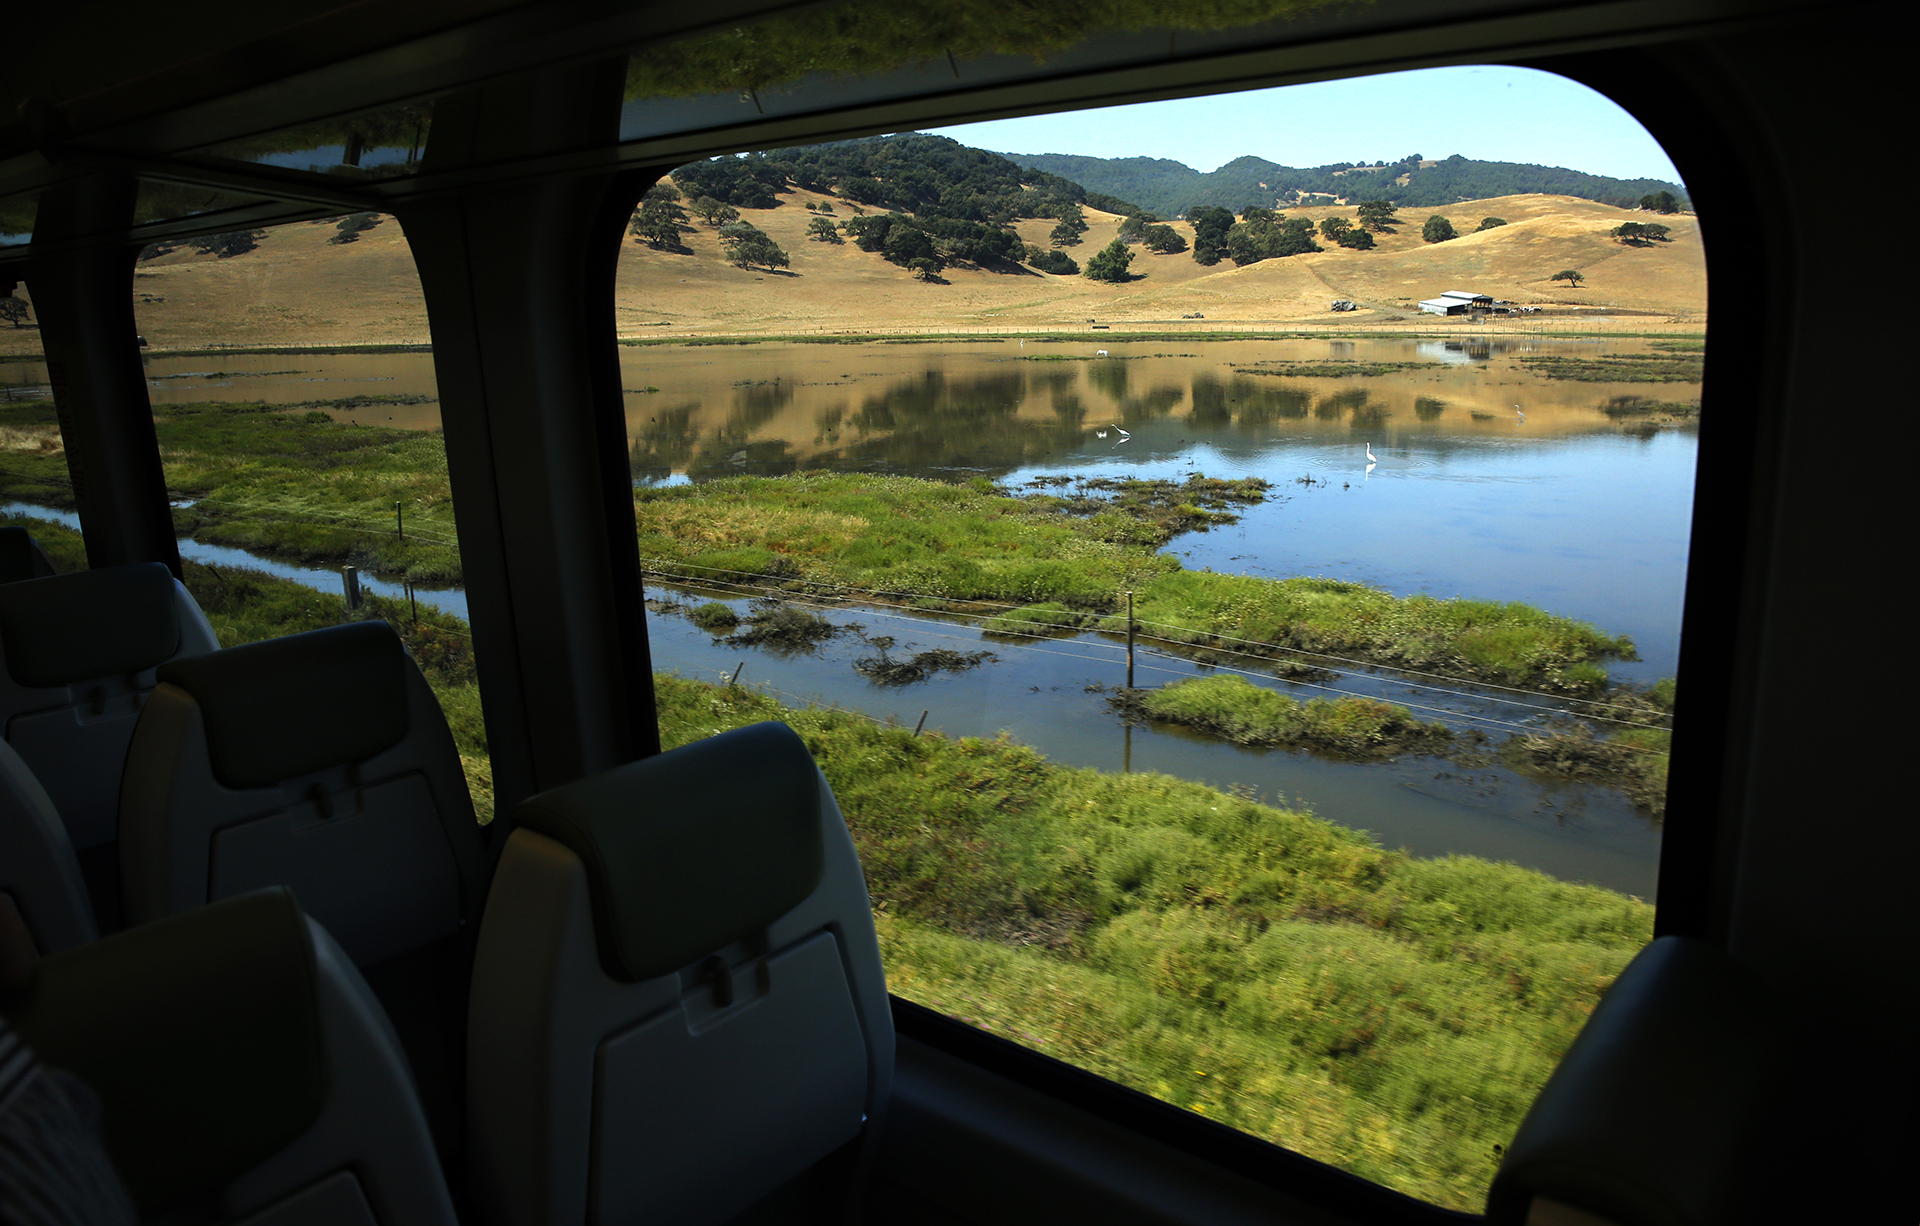 The photo is taken inside the train looking out. Inside are seats in siloutte. Outside is a lush marshland with green grass poking out of a shallow body of water. In the distance a yellow hillside with dry grass rises above the marsh.